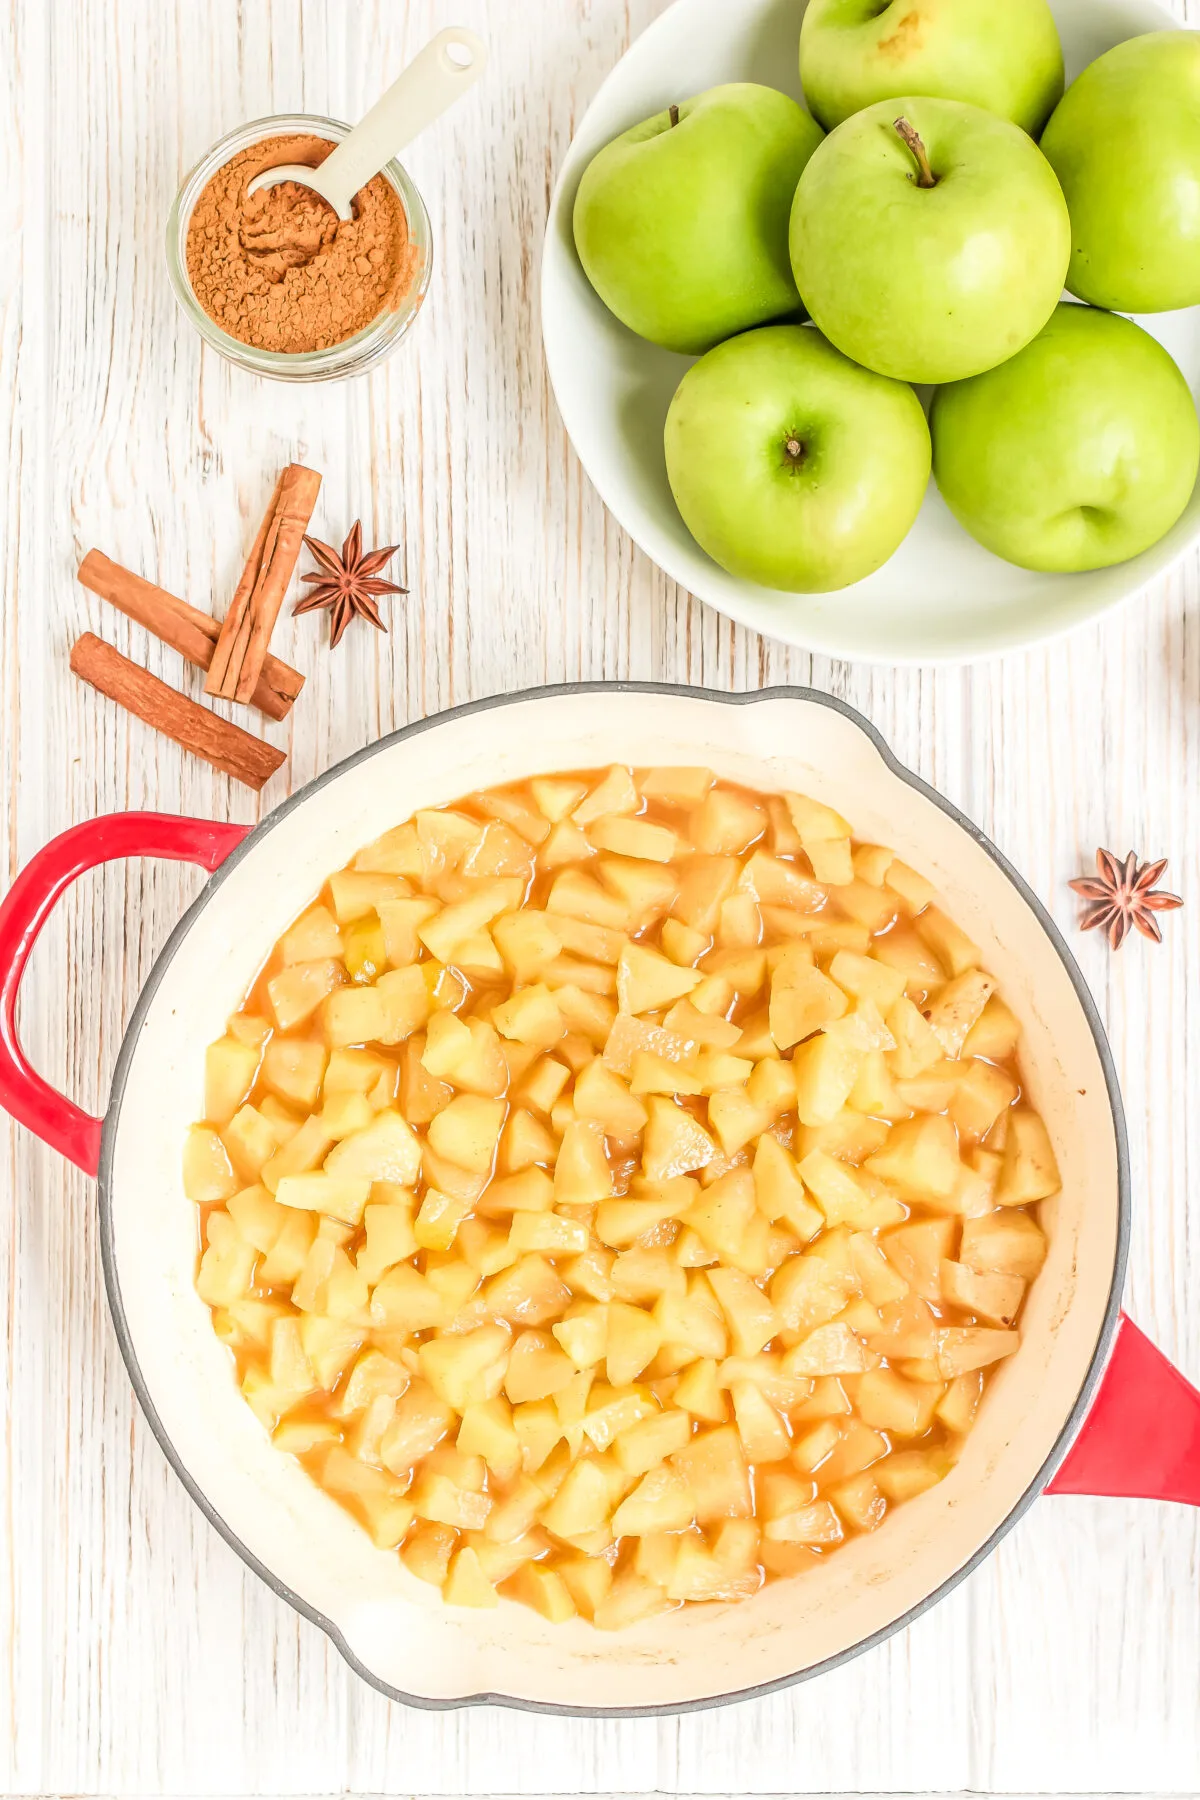 Tender cooked apples in the skillet.